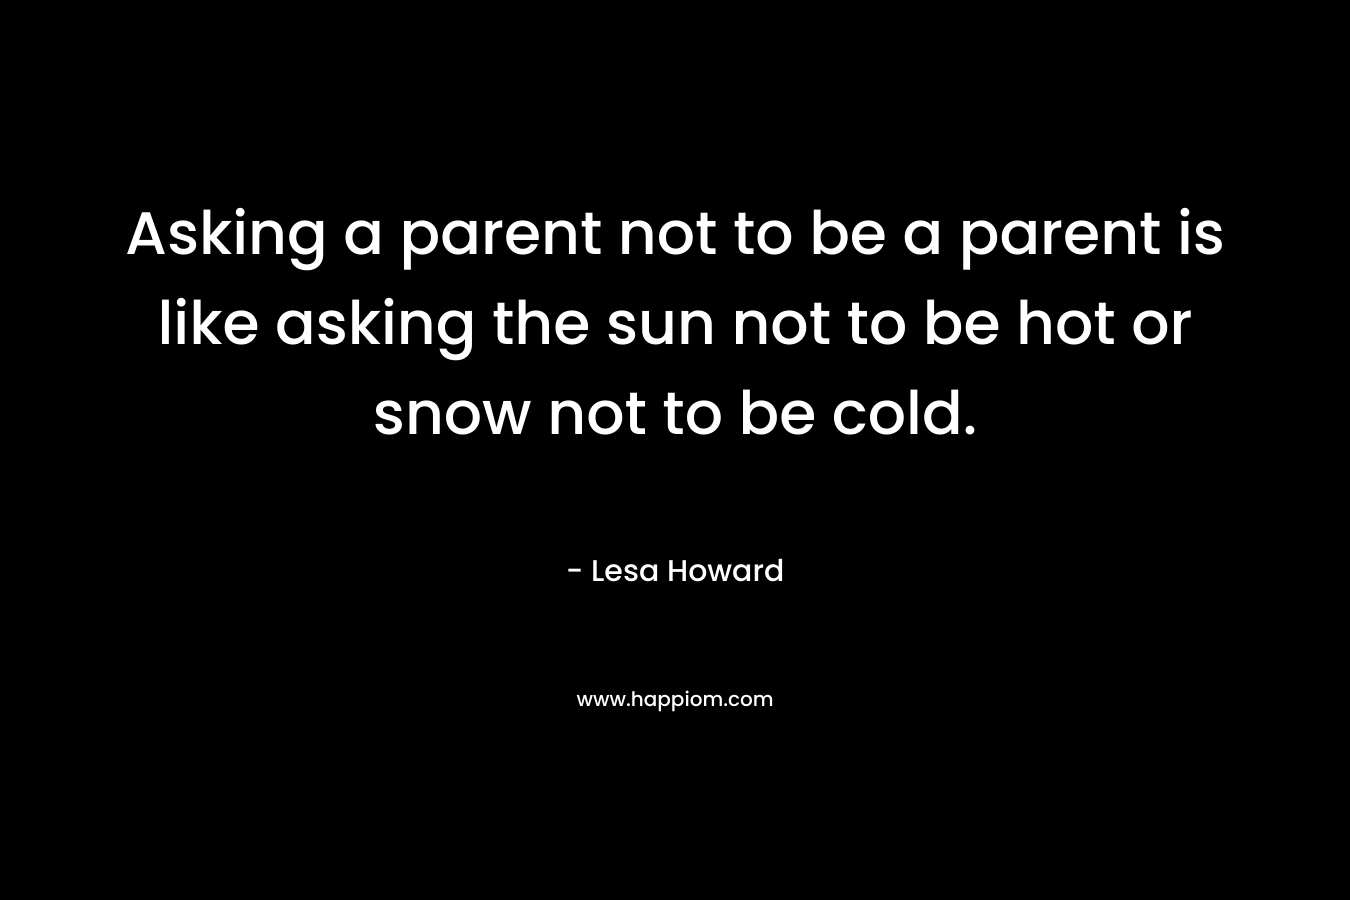 Asking a parent not to be a parent is like asking the sun not to be hot or snow not to be cold.